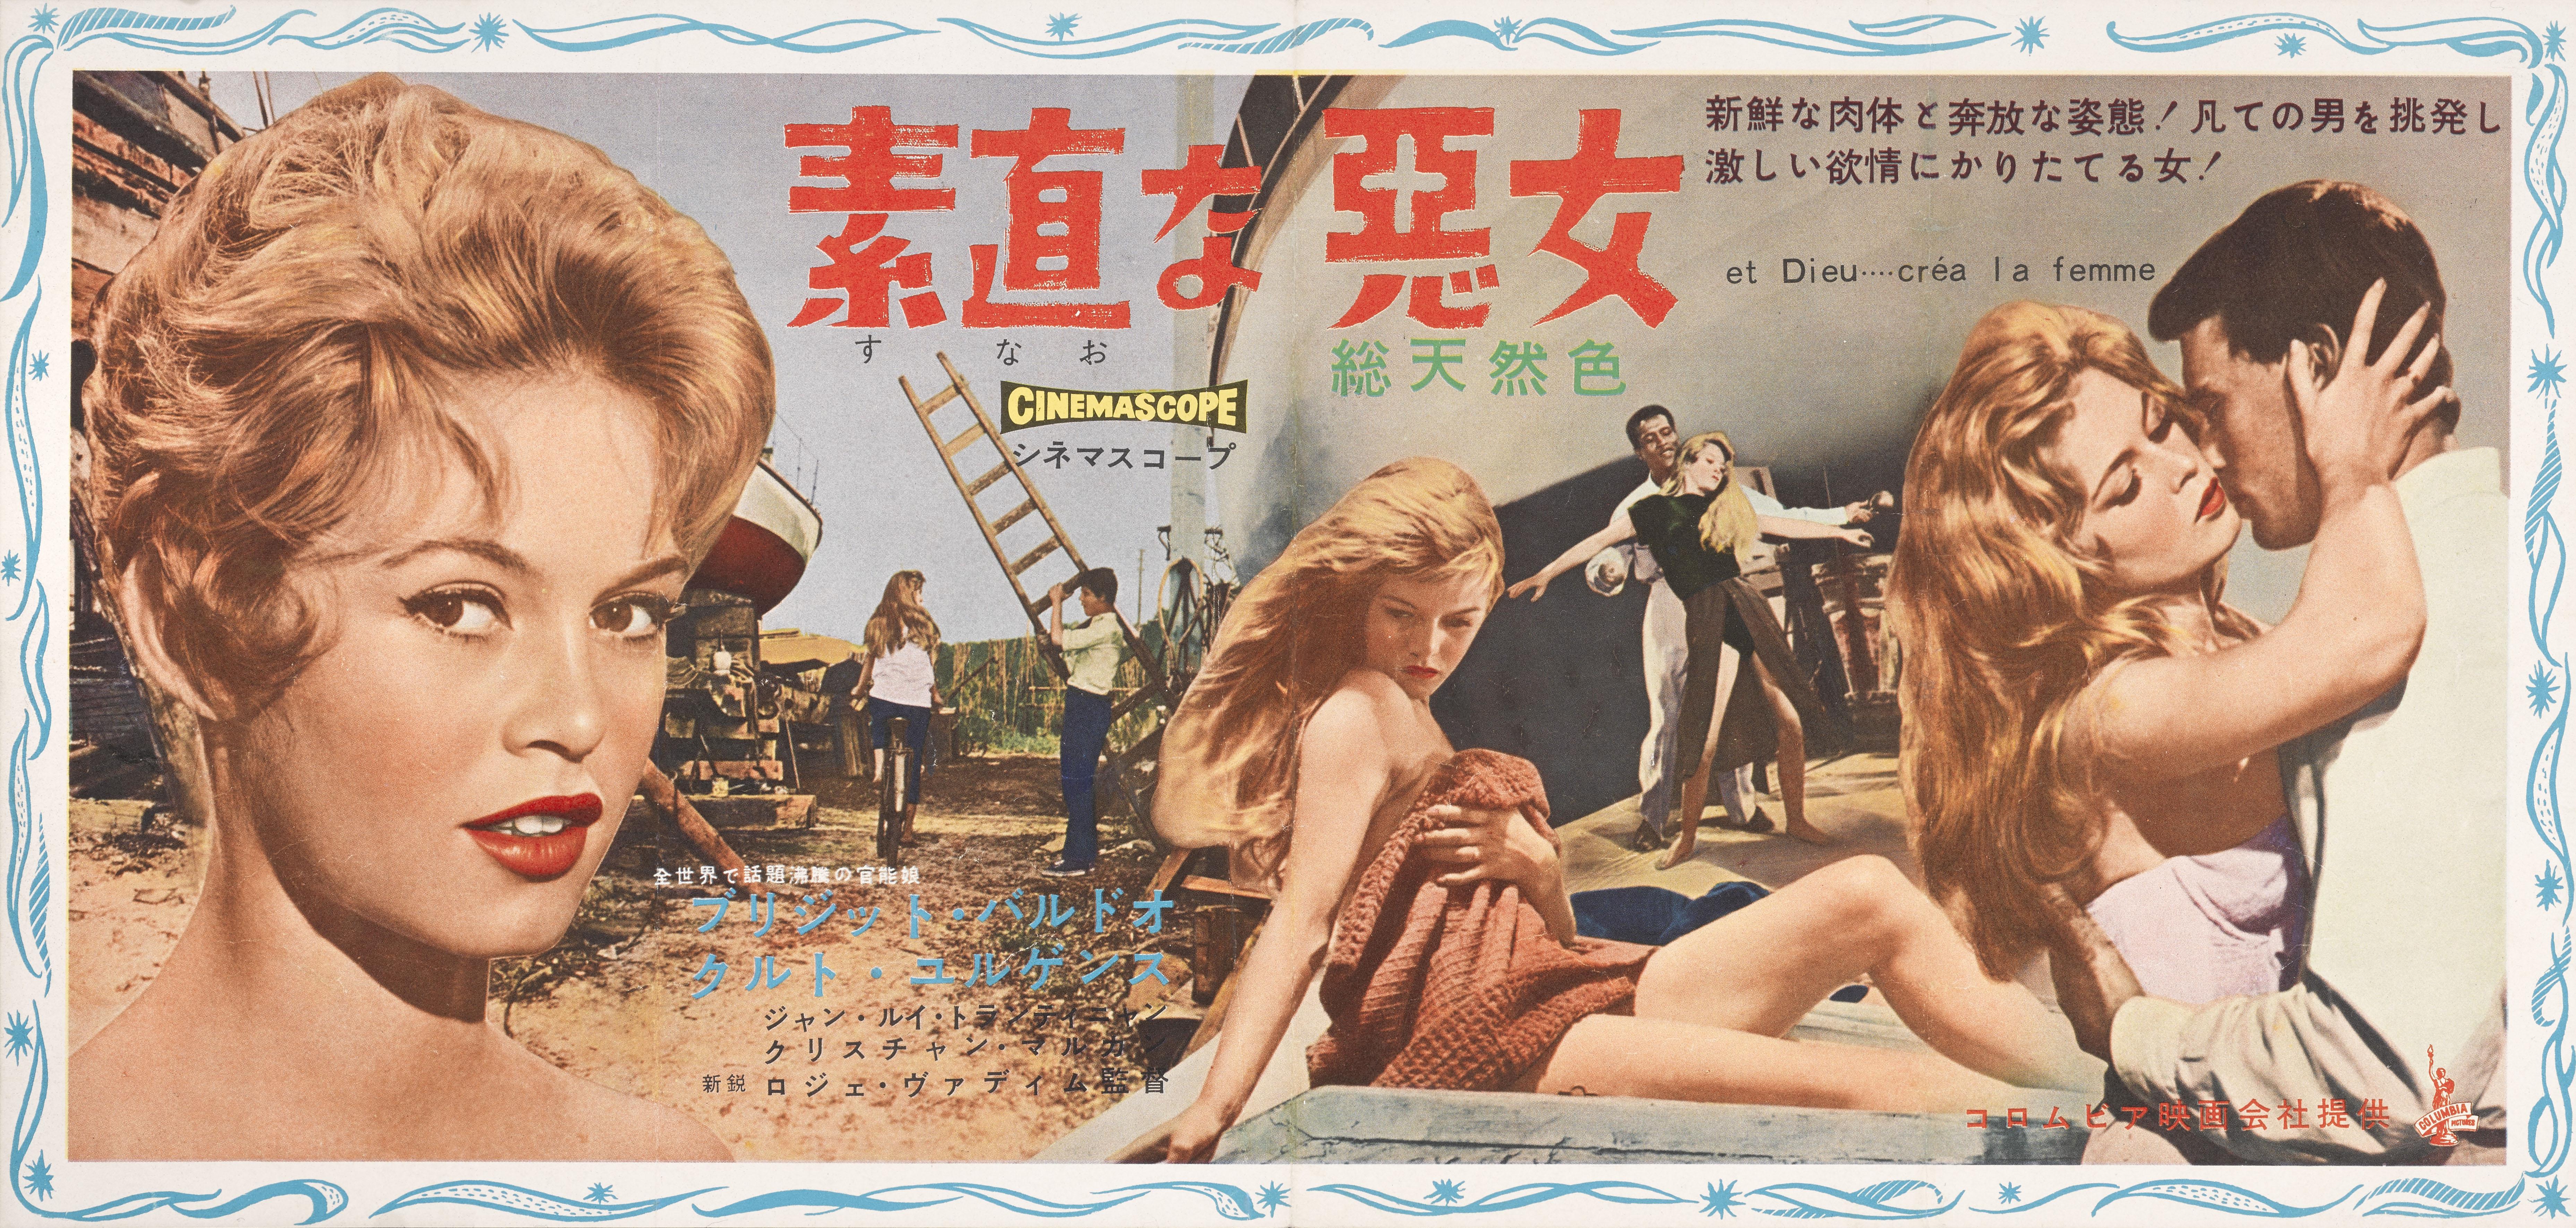 Original Japanese film poster for the 1956 film Et Dieu ... Crea La Femme / And God Created Woman.
The film starred Brigitte Bardot, Curd Jurgens, Jean-Louis Trintignant and was directed by Roger Vadim.
The artwork on this poster is unique to the